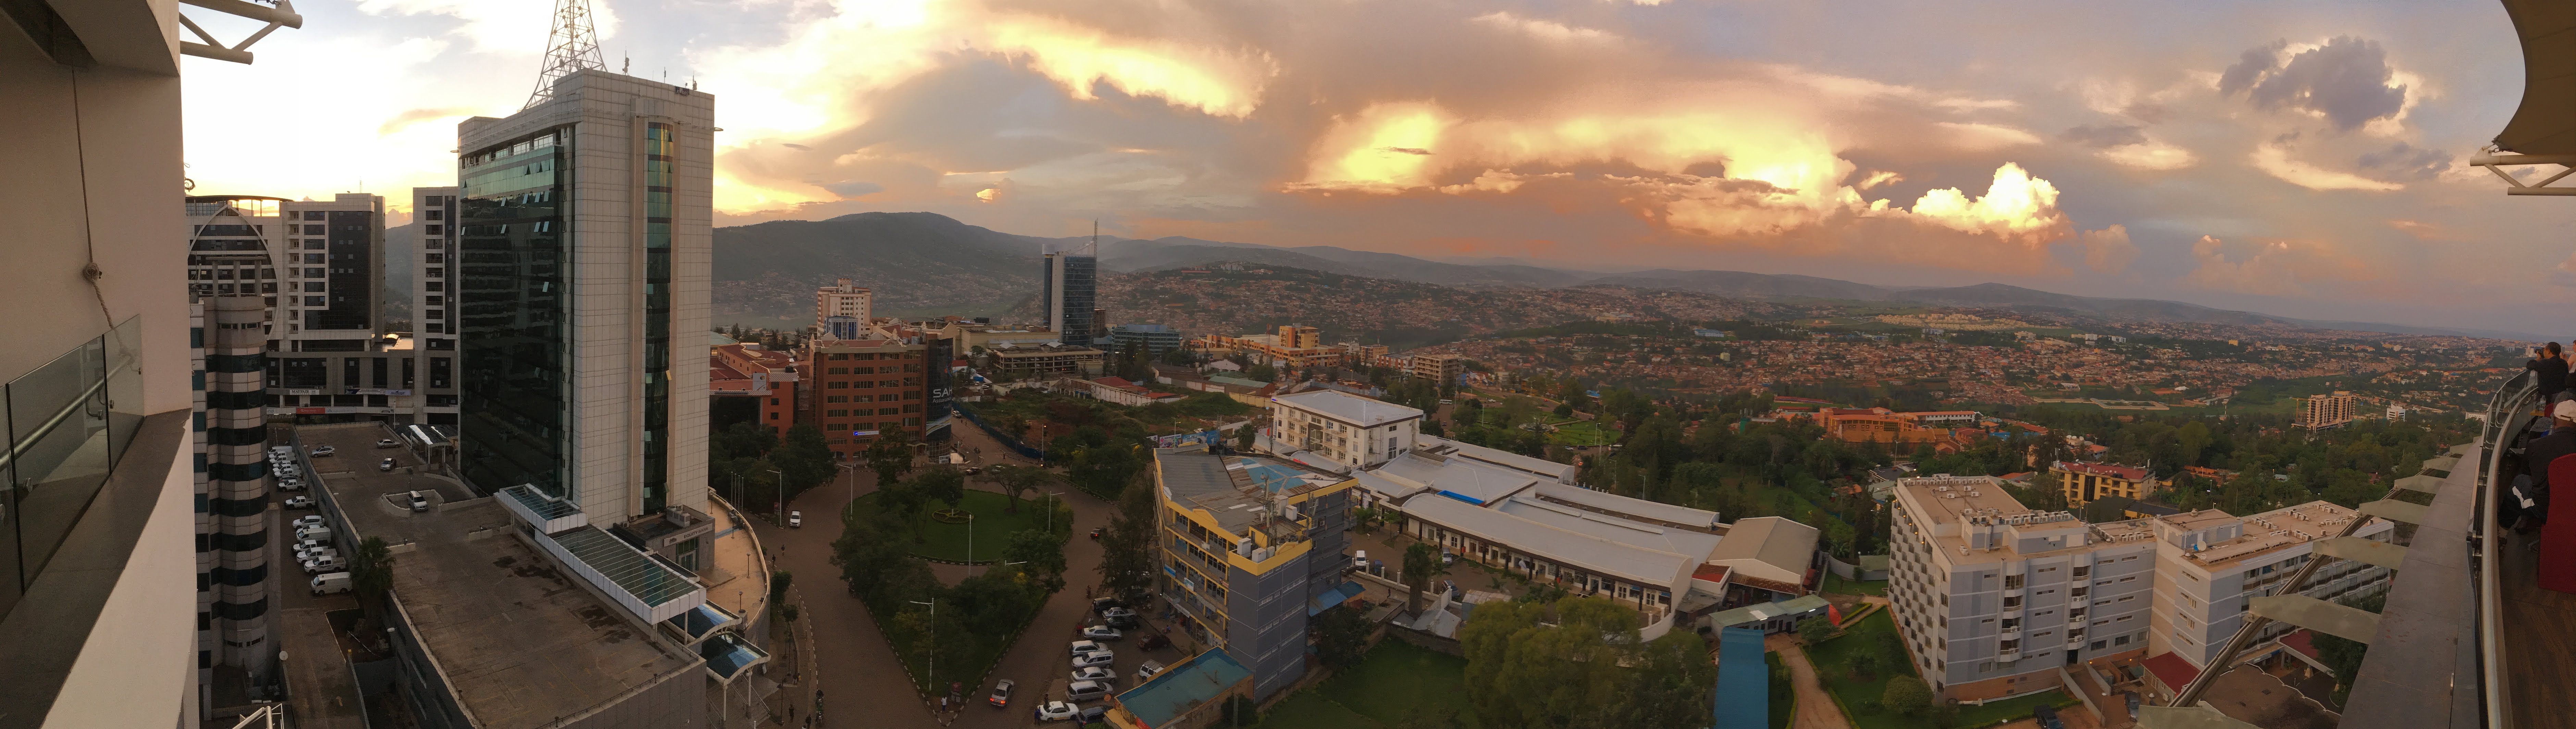 Kigali City at Sunset Time, Here you can see  almost 50% Of the Beautiful Kigali